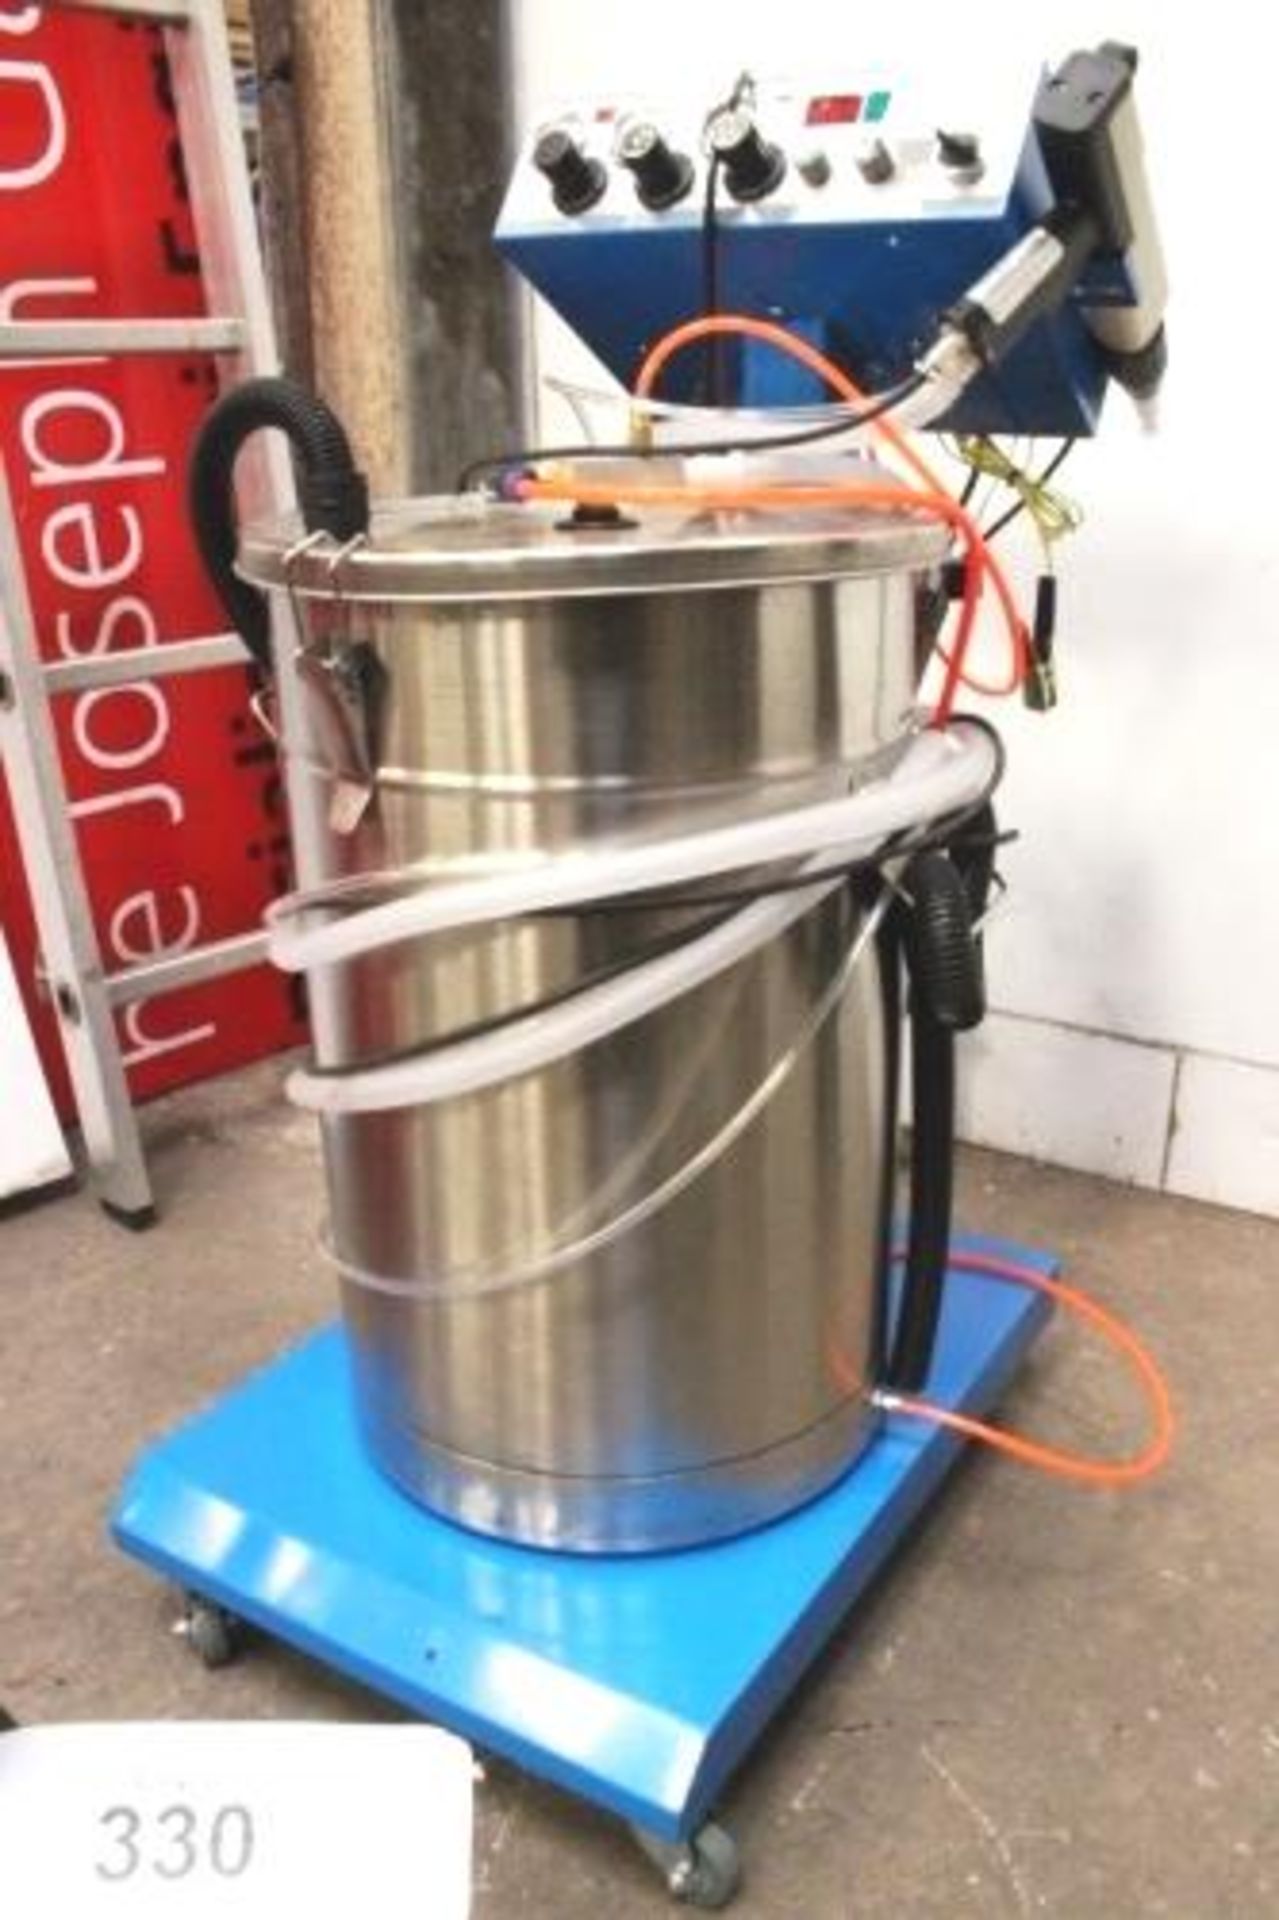 A mobile powder coating machine - New, checked complete, does not power on, untested (staff room